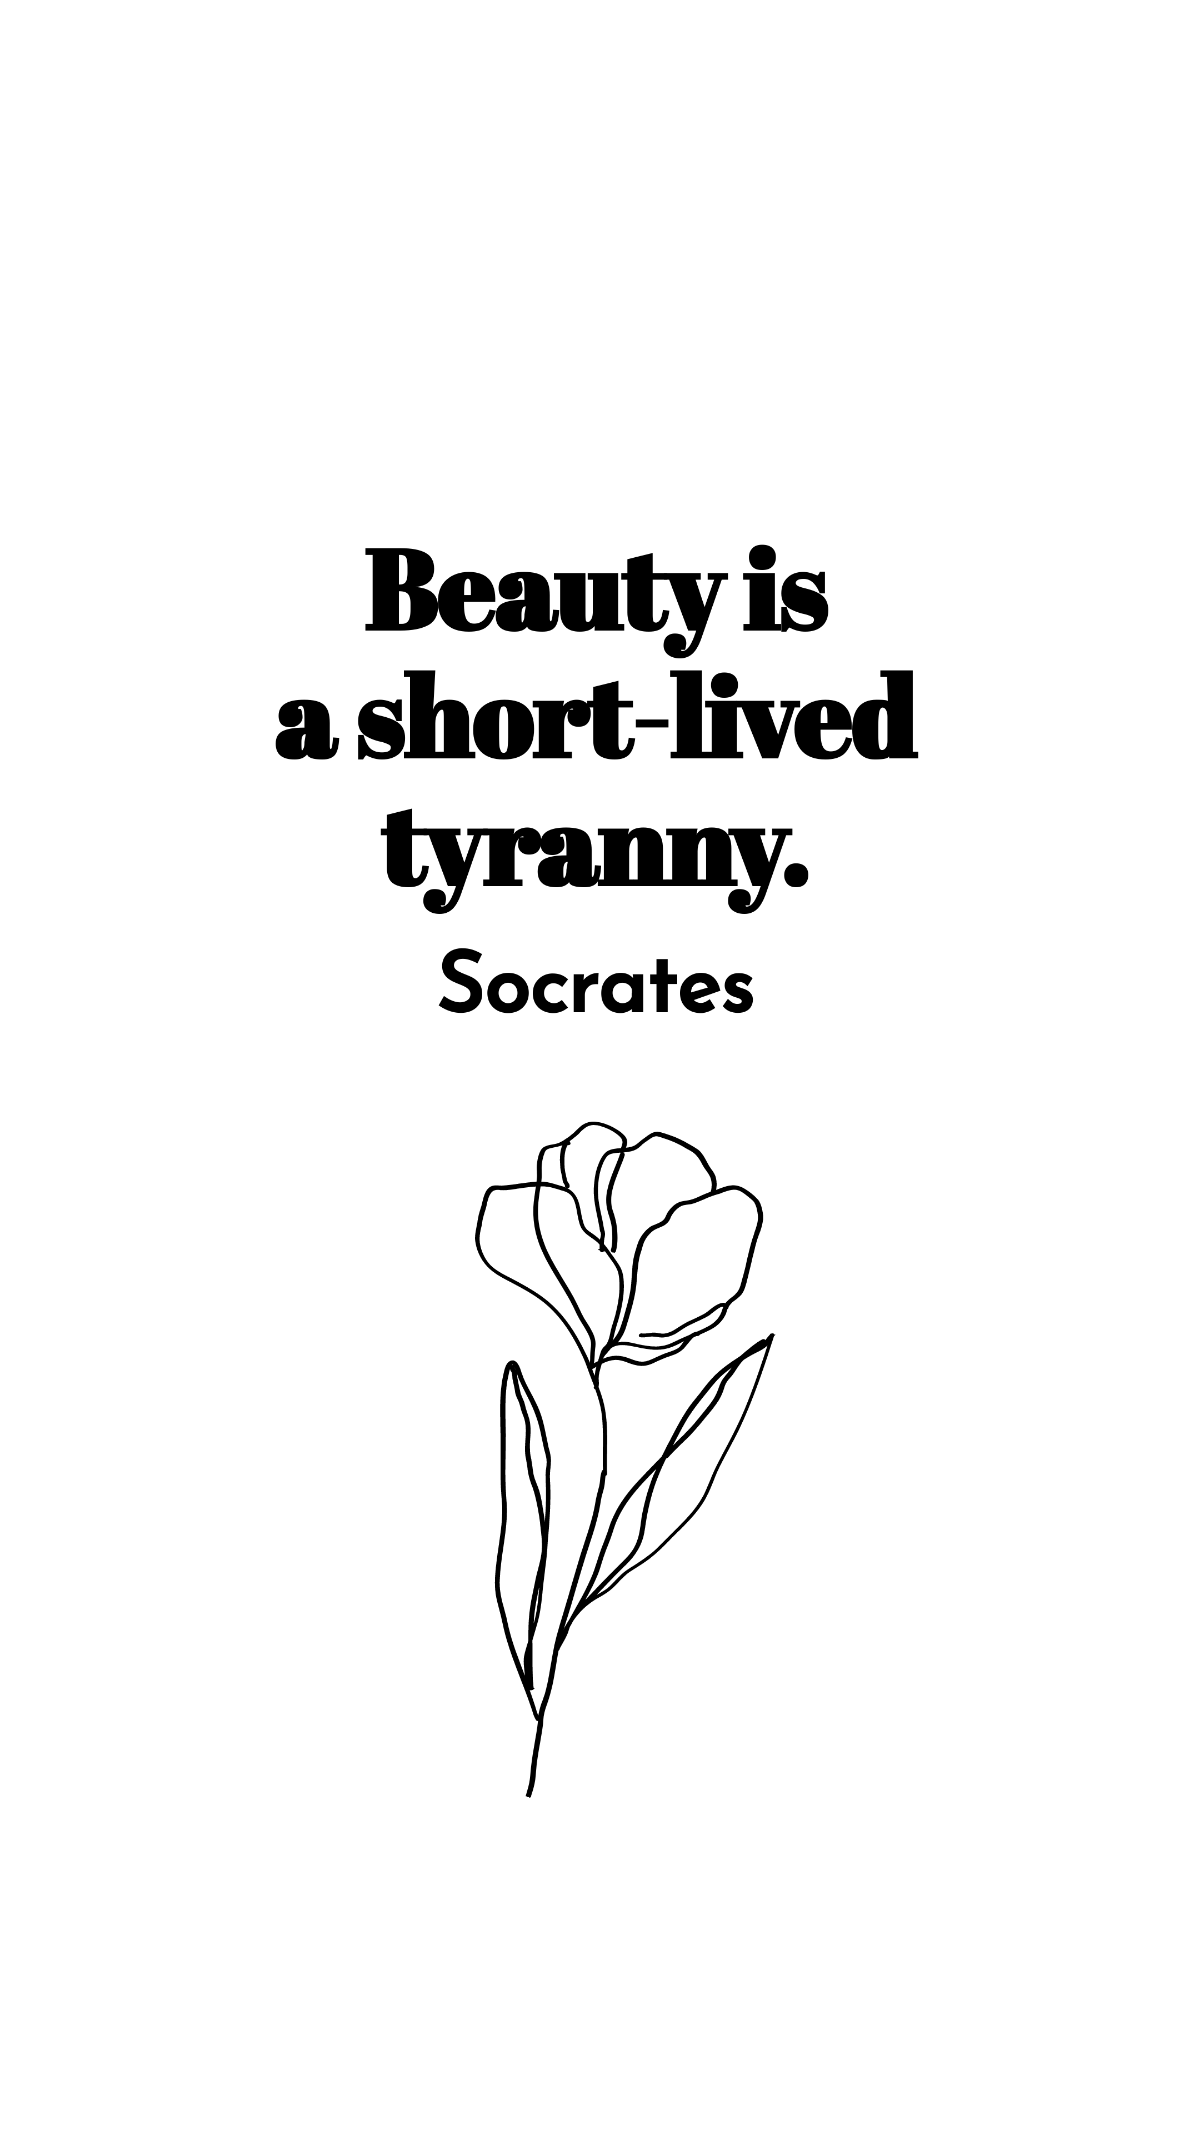 Socrates - Beauty is a short-lived tyranny.